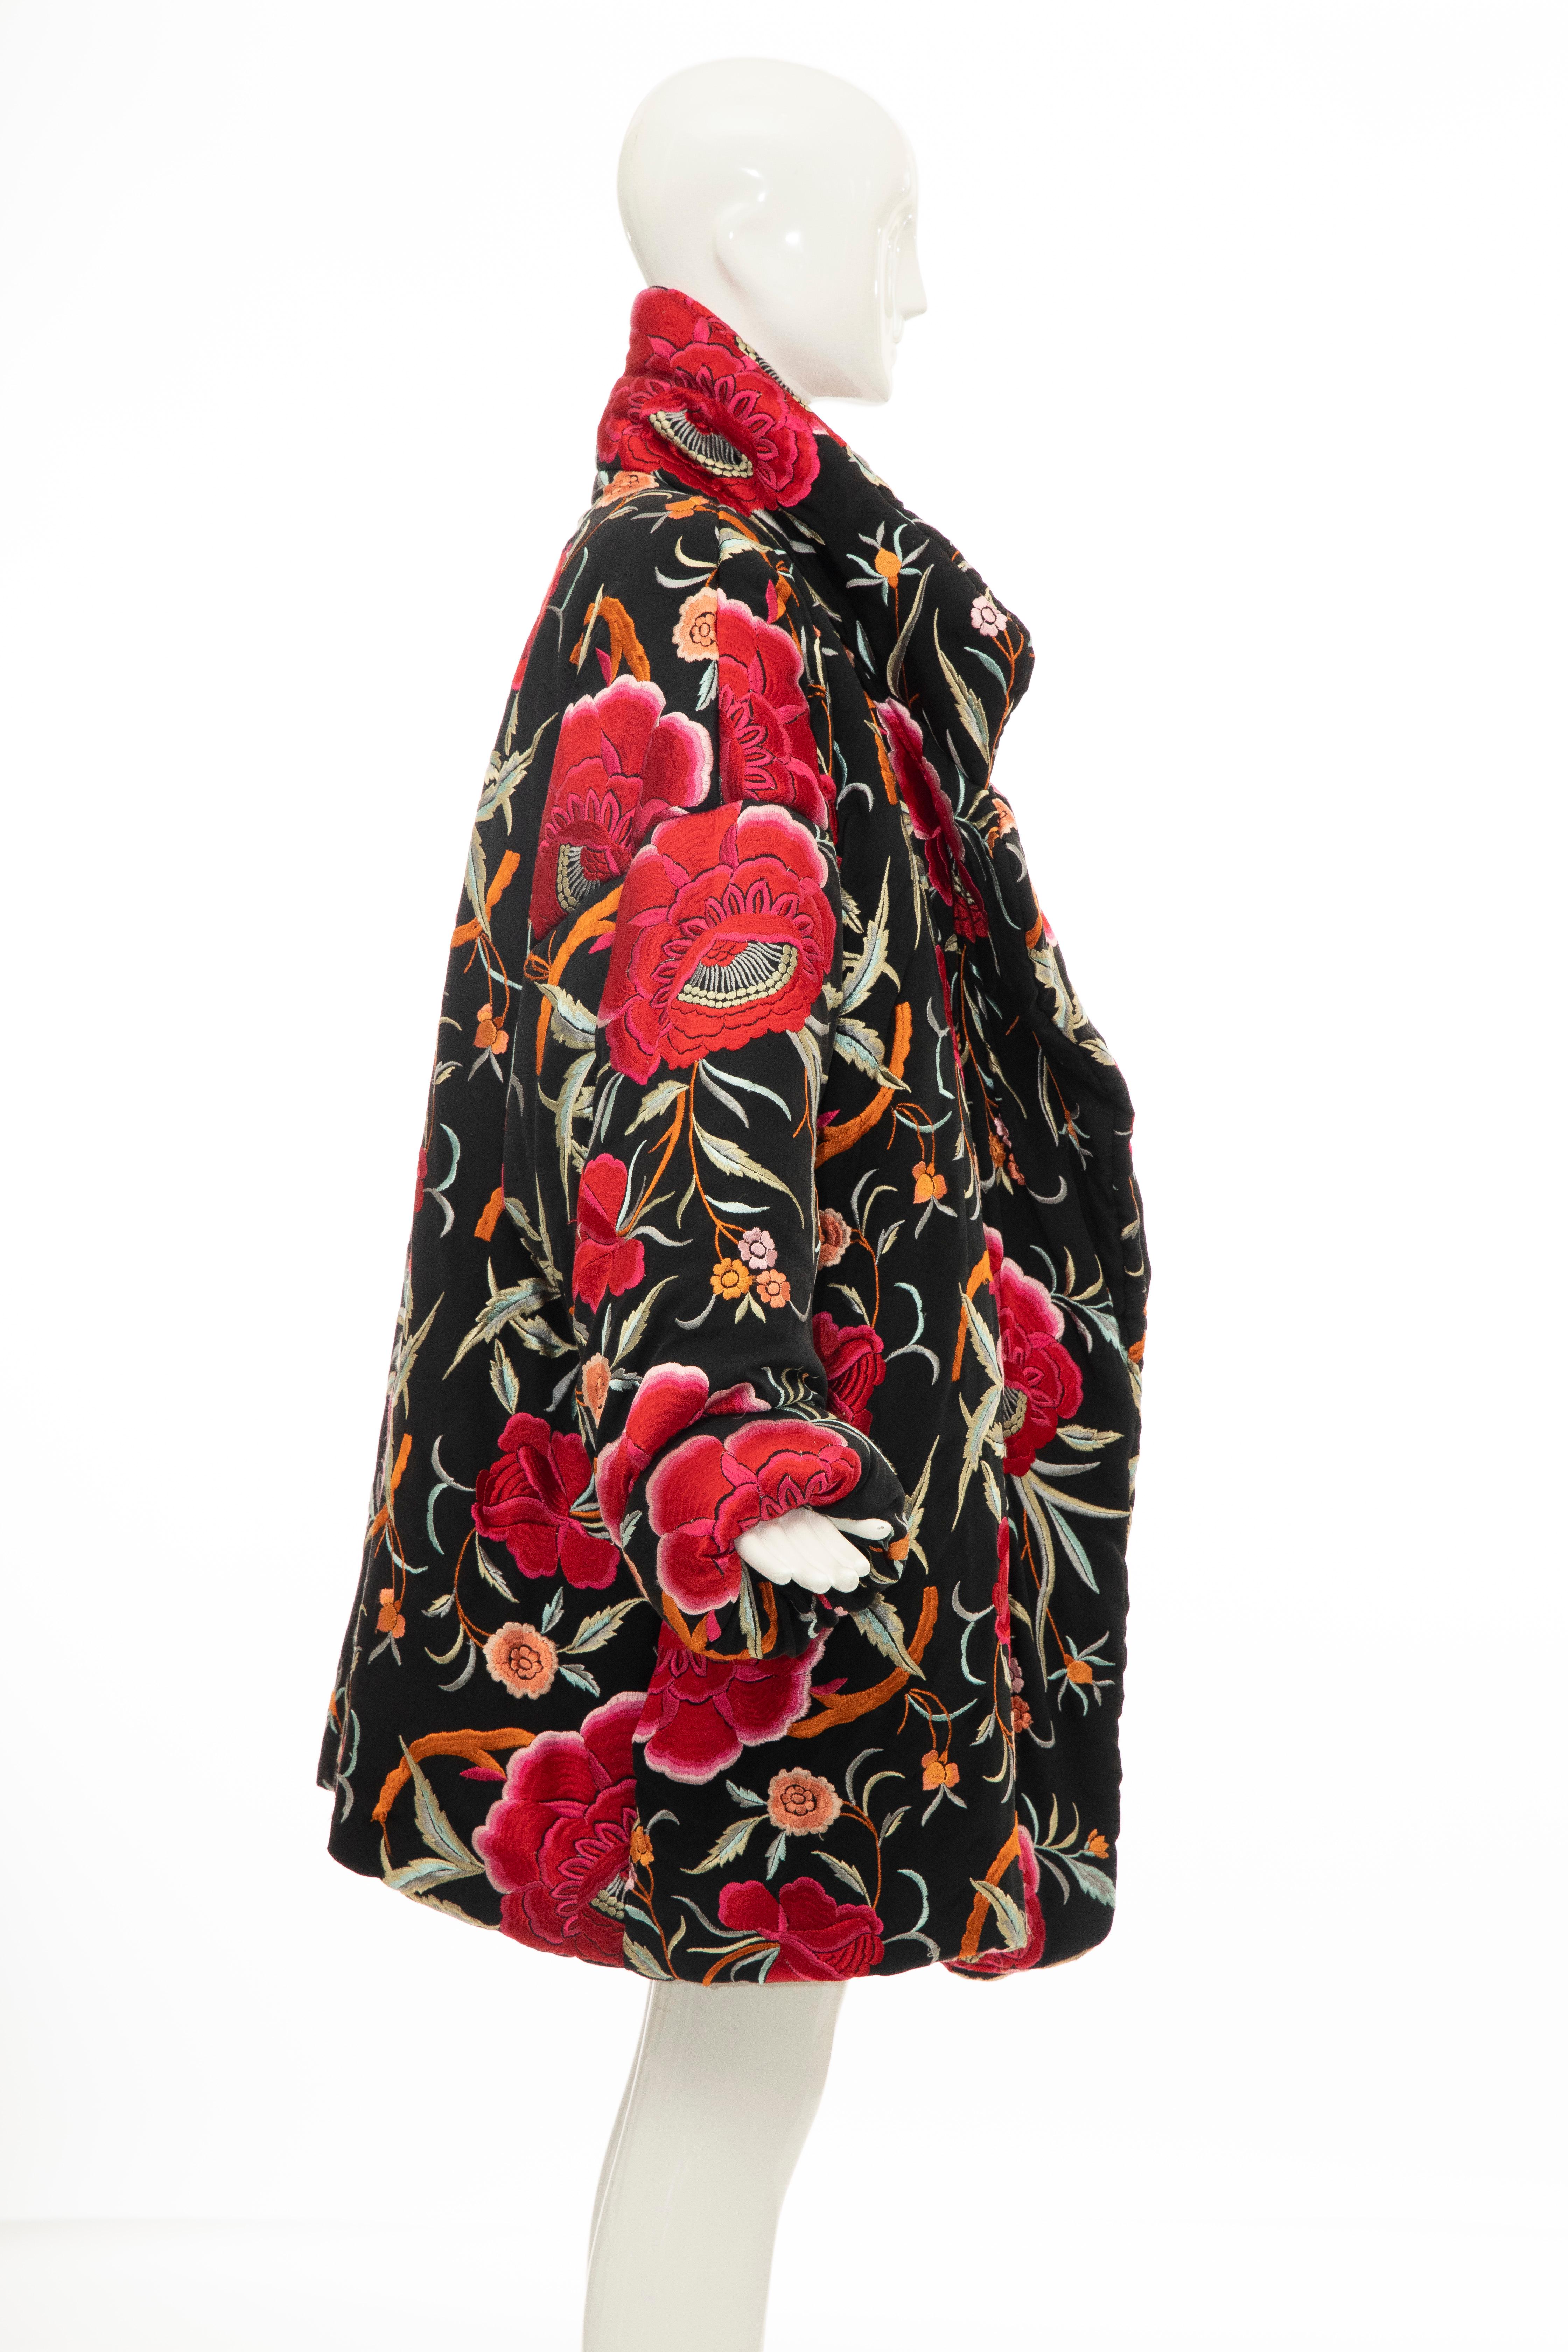 Norma Kamali Black Floral Embroidered Cocoon Coat, Circa: 1980's 1